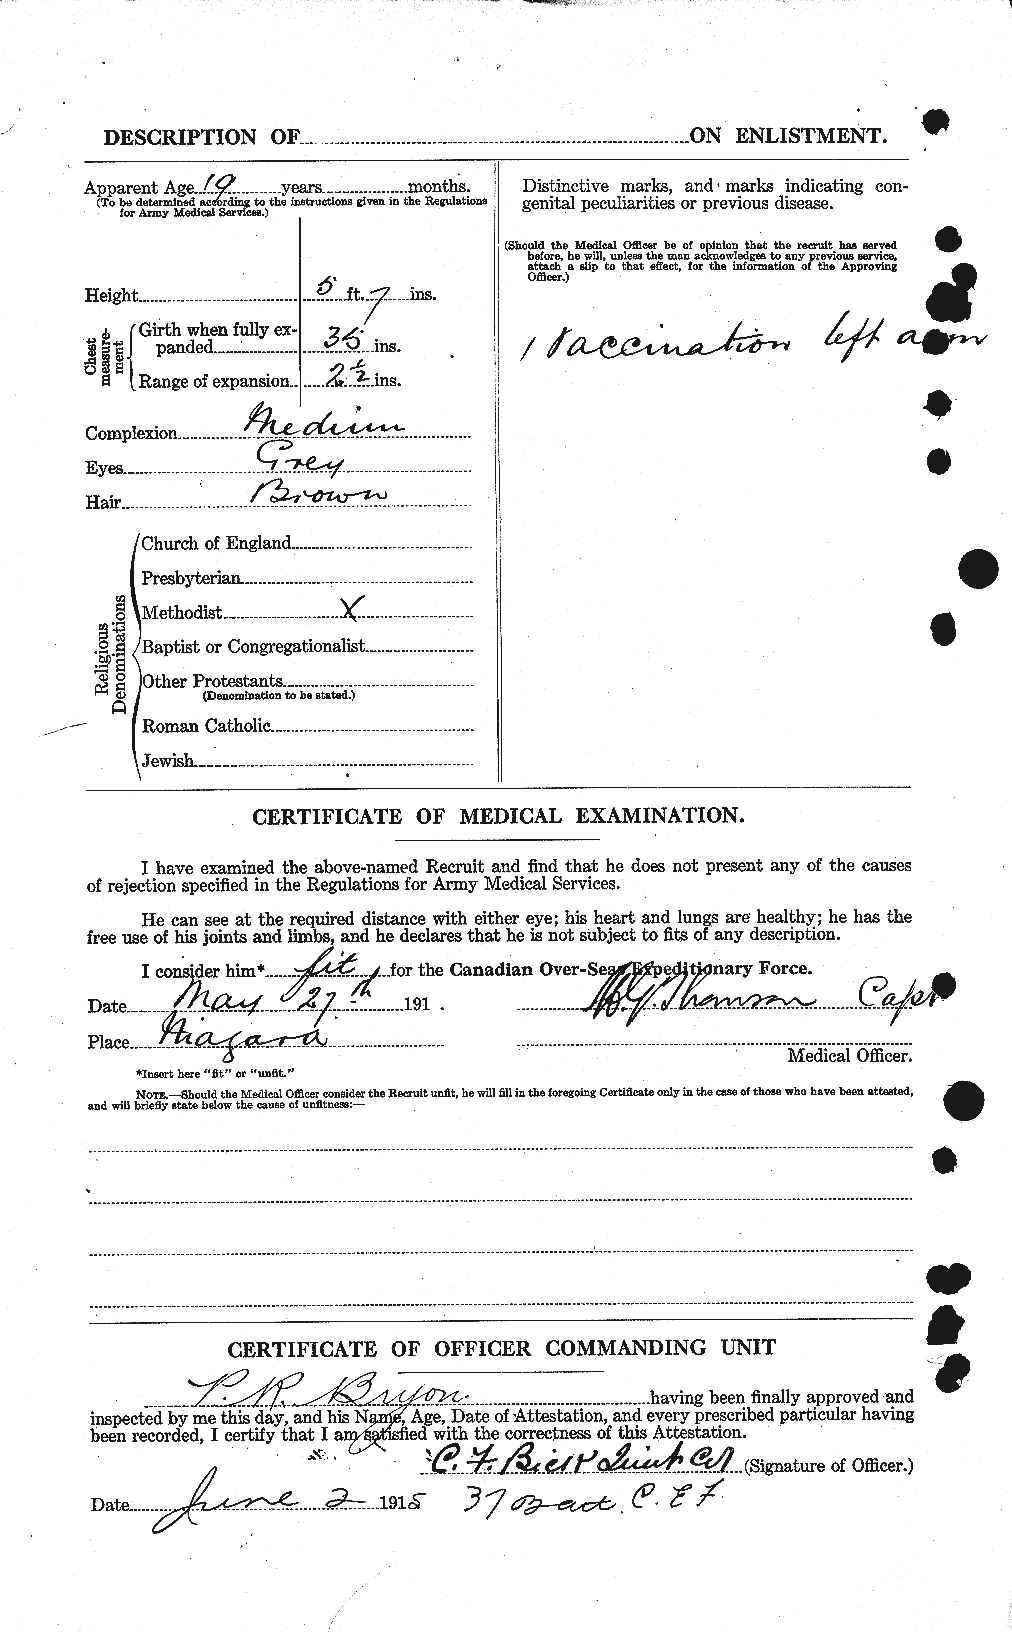 Personnel Records of the First World War - CEF 268900b